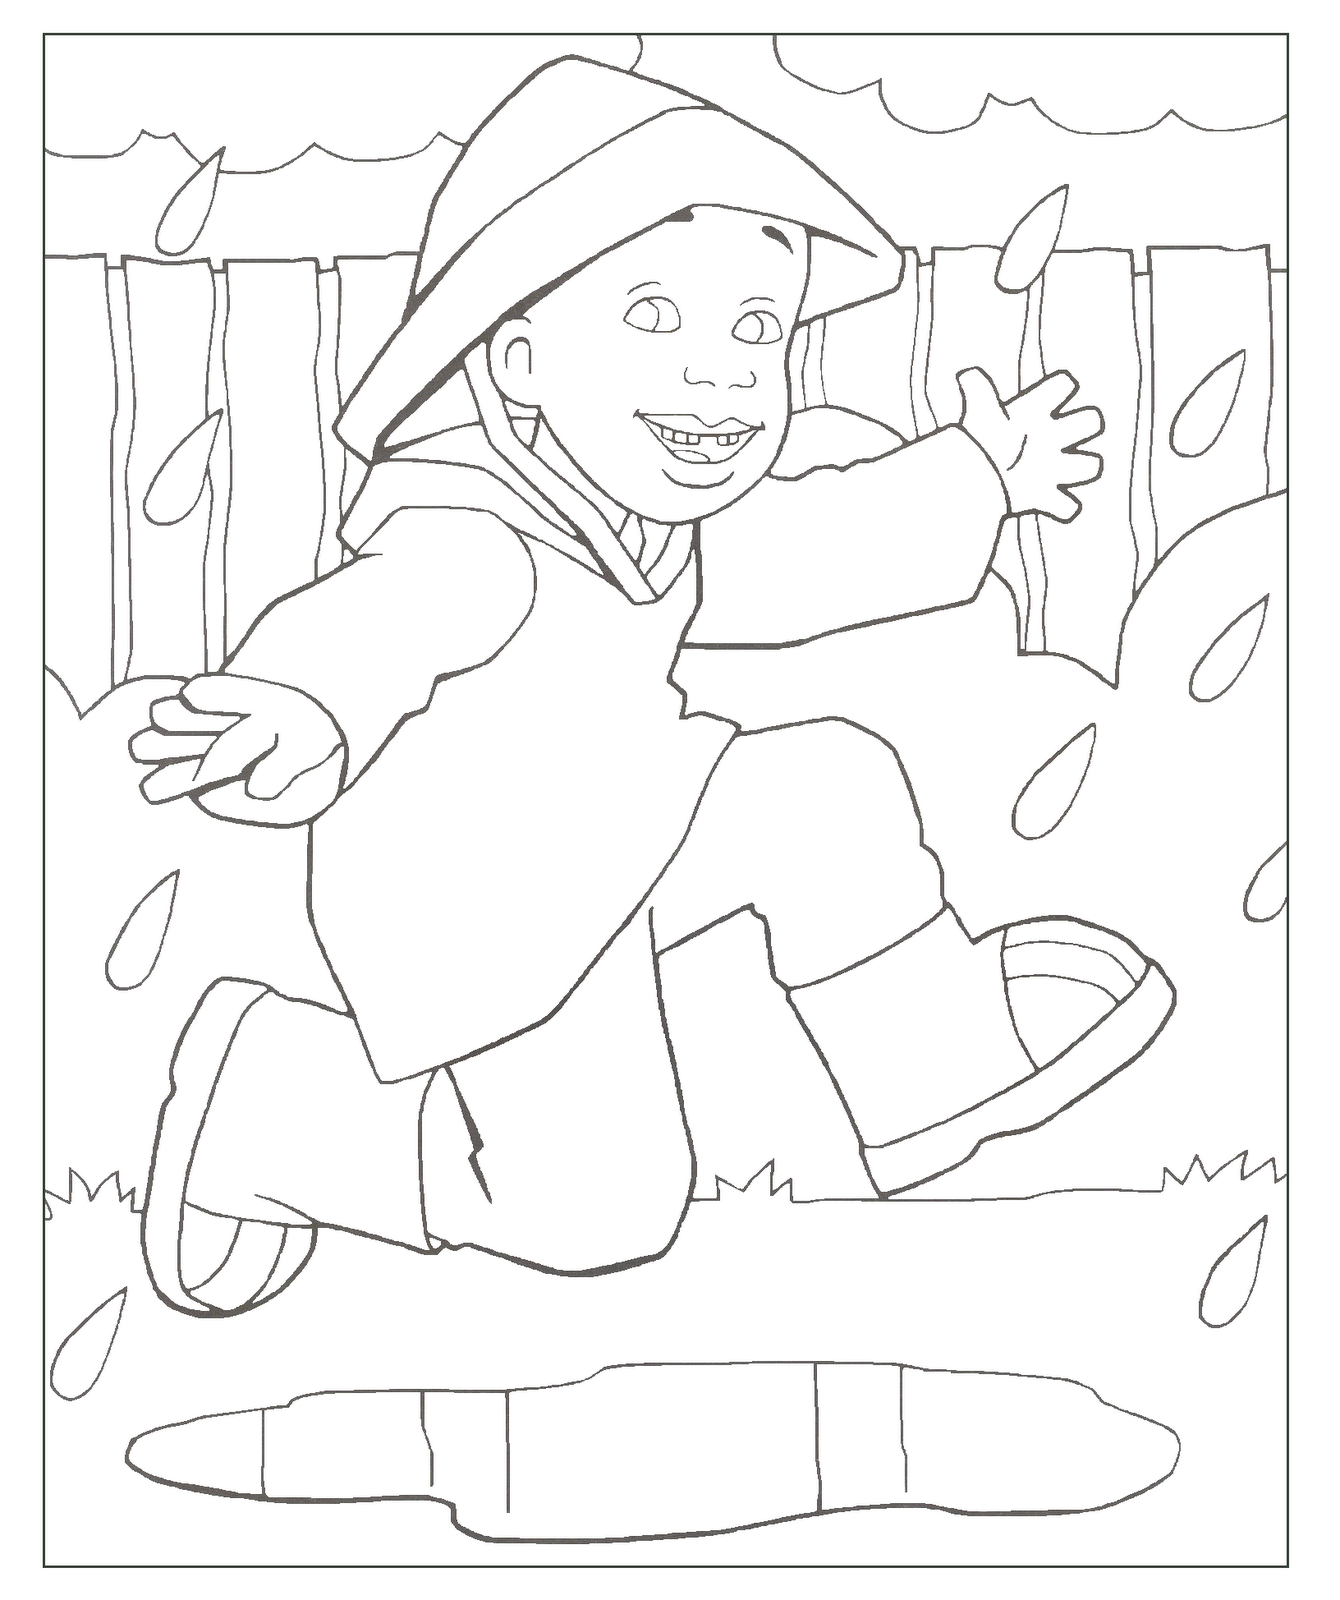 Little Bill - Coloring Pages for Kids and for Adults